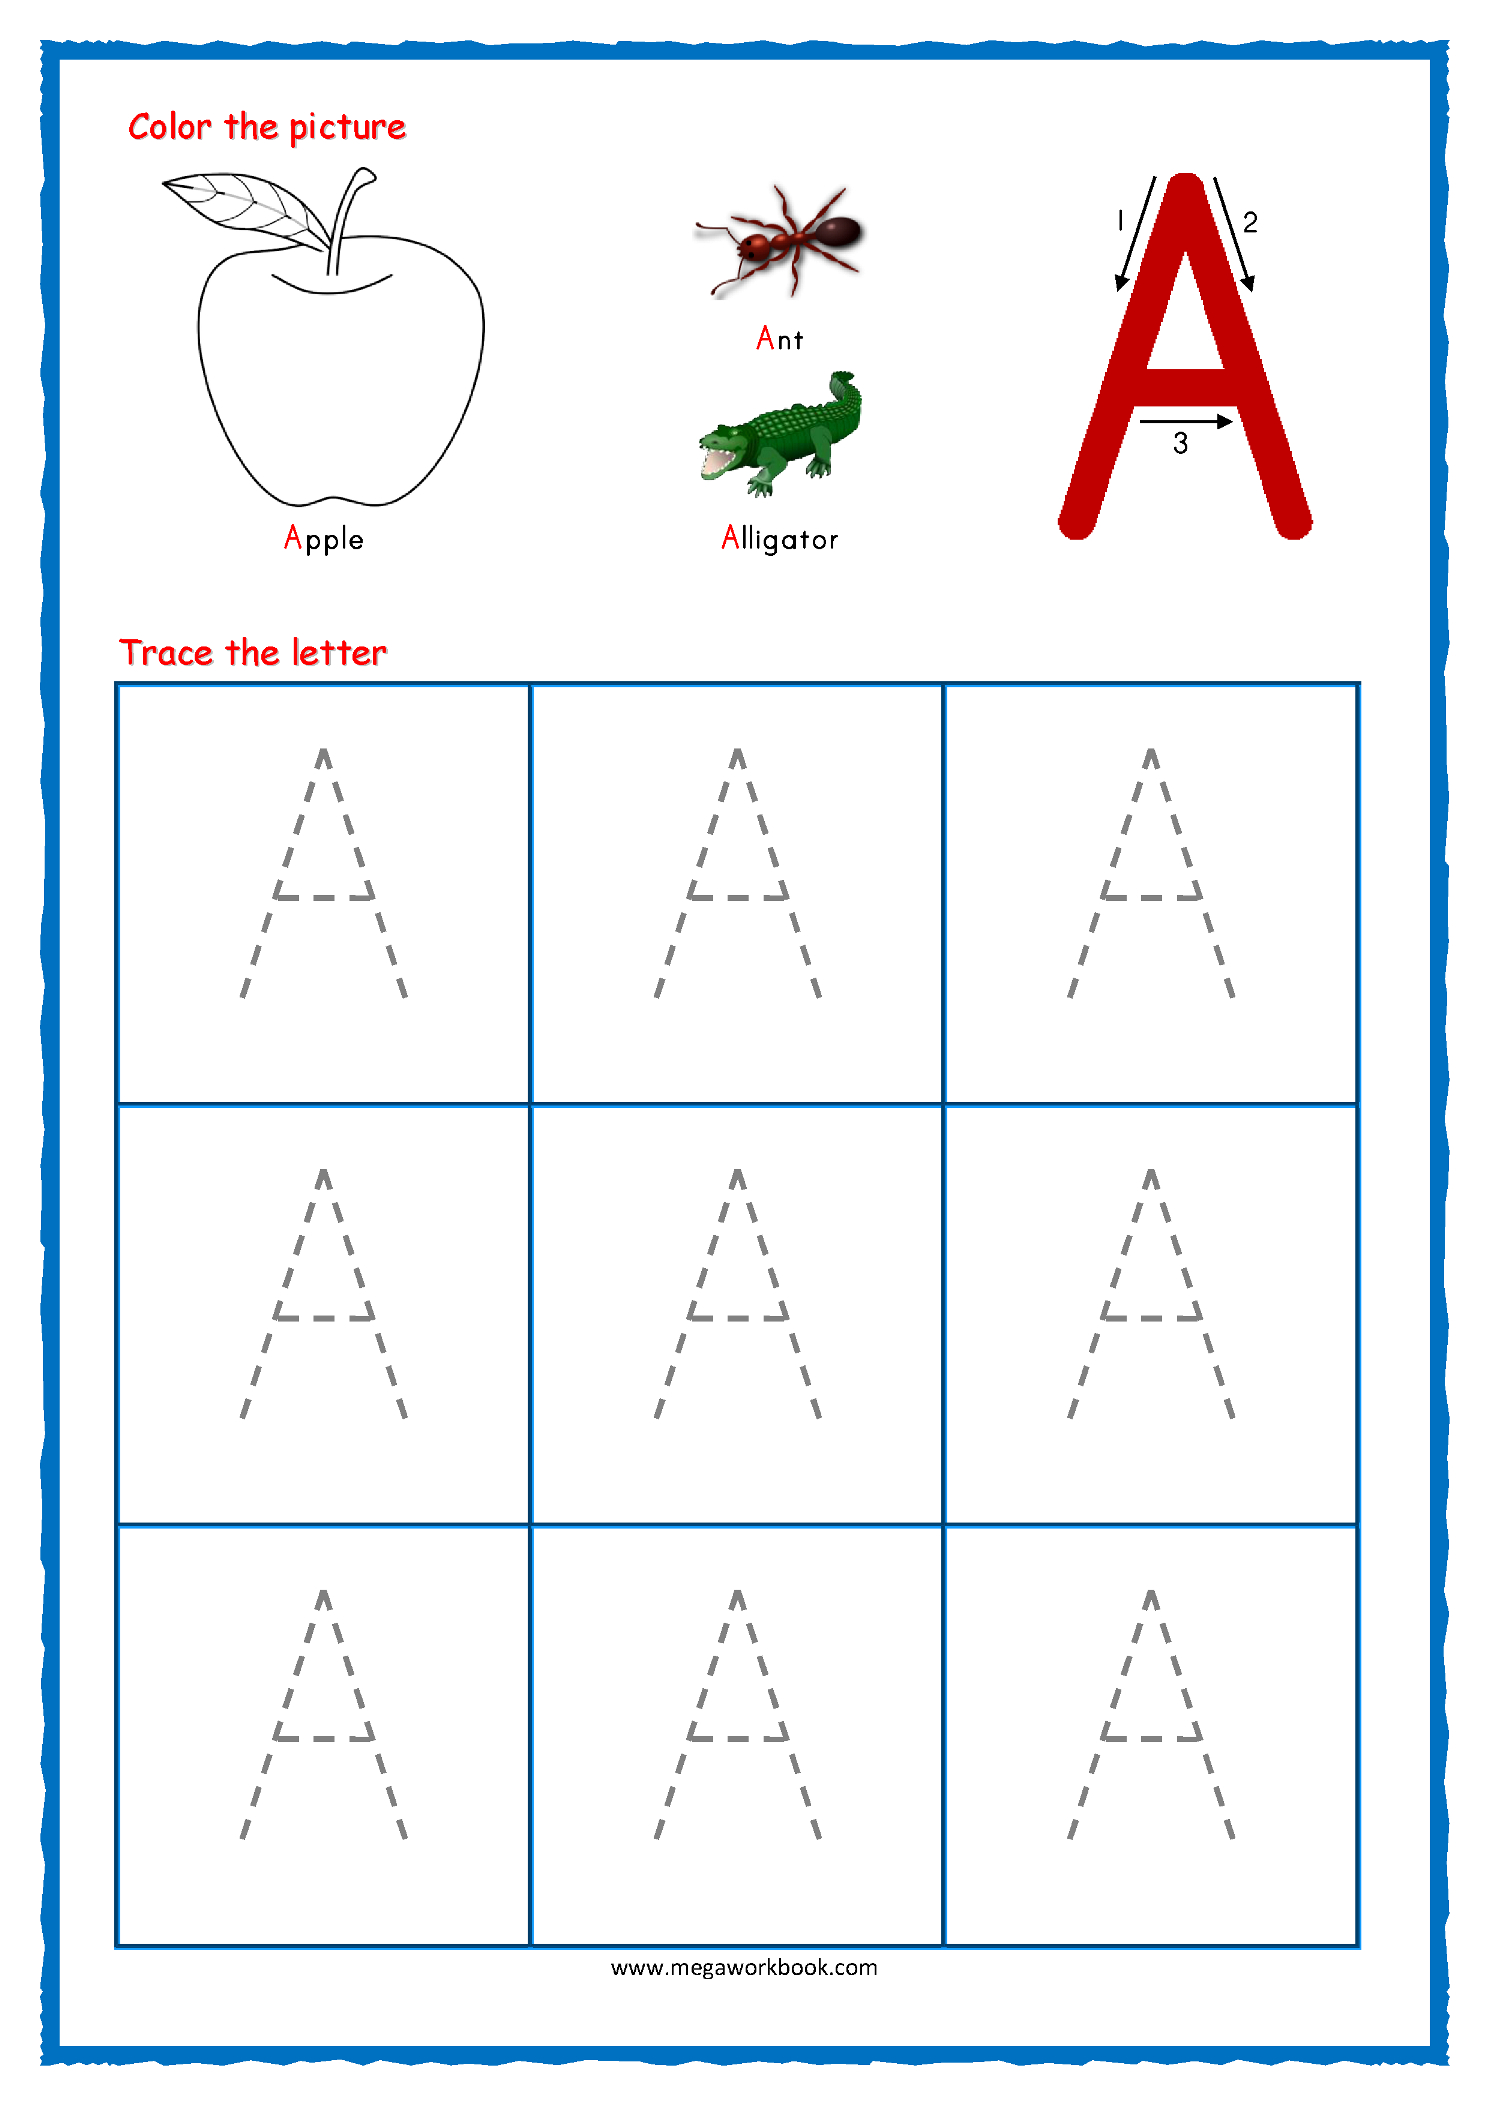 Tracing Letters - Alphabet Tracing - Capital Letters with Preschool Tracing Letters Free Worksheets